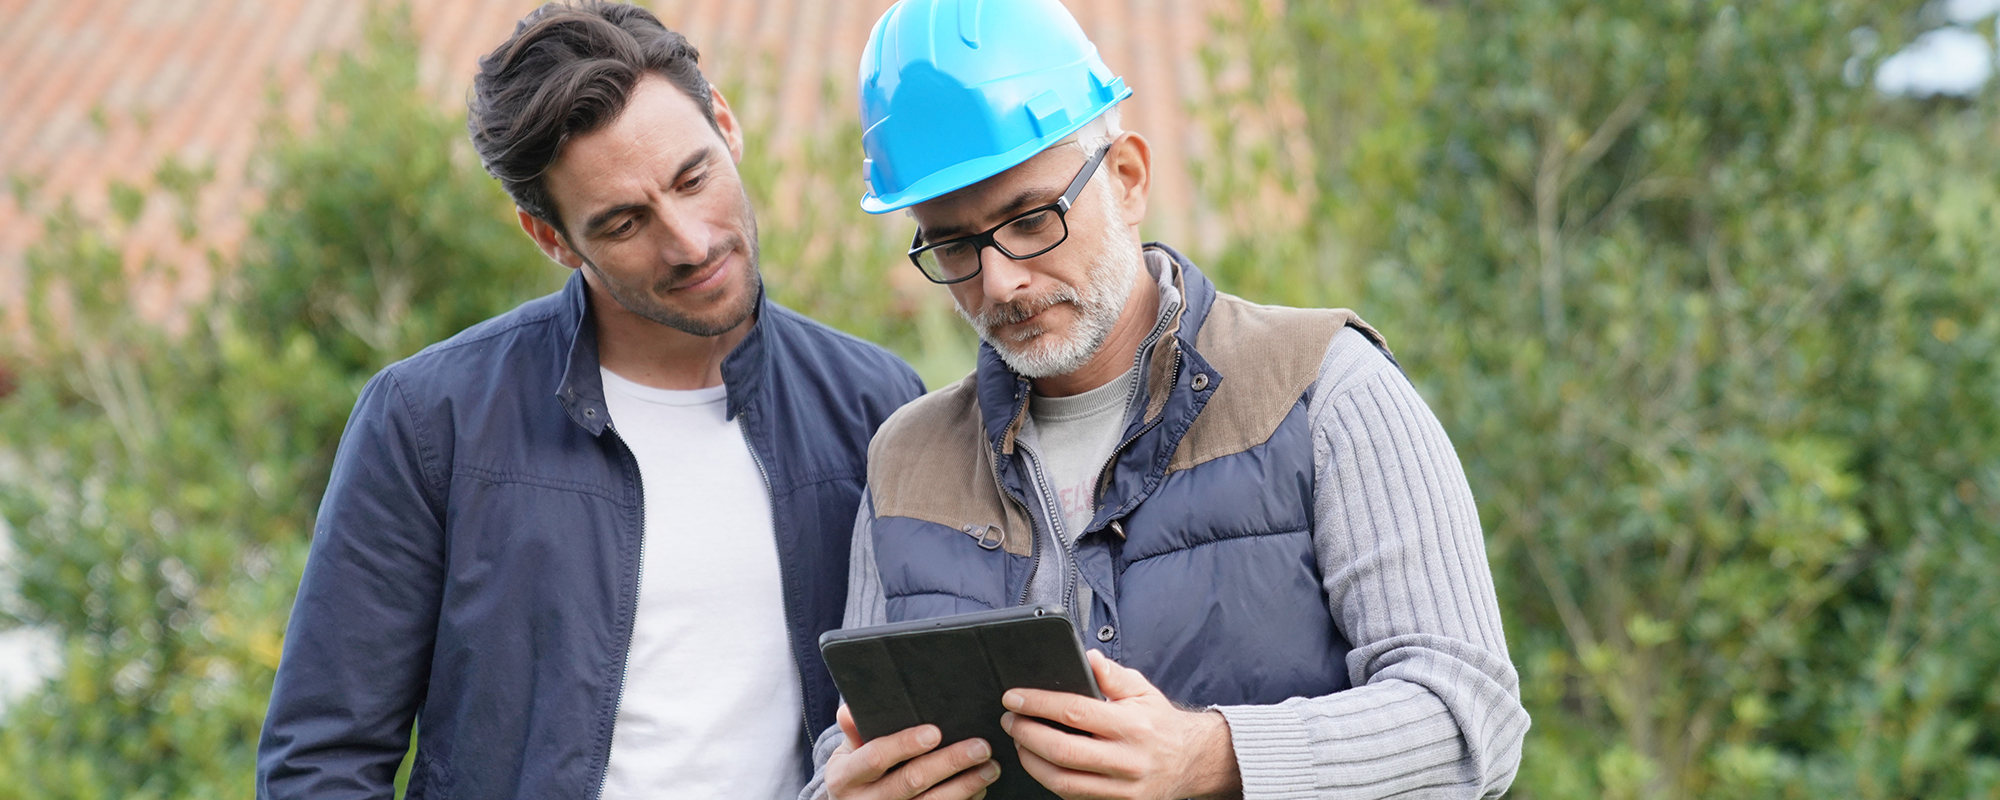 two men standing outside looking at a tablet, one of the men is wearing a blue hard hat.